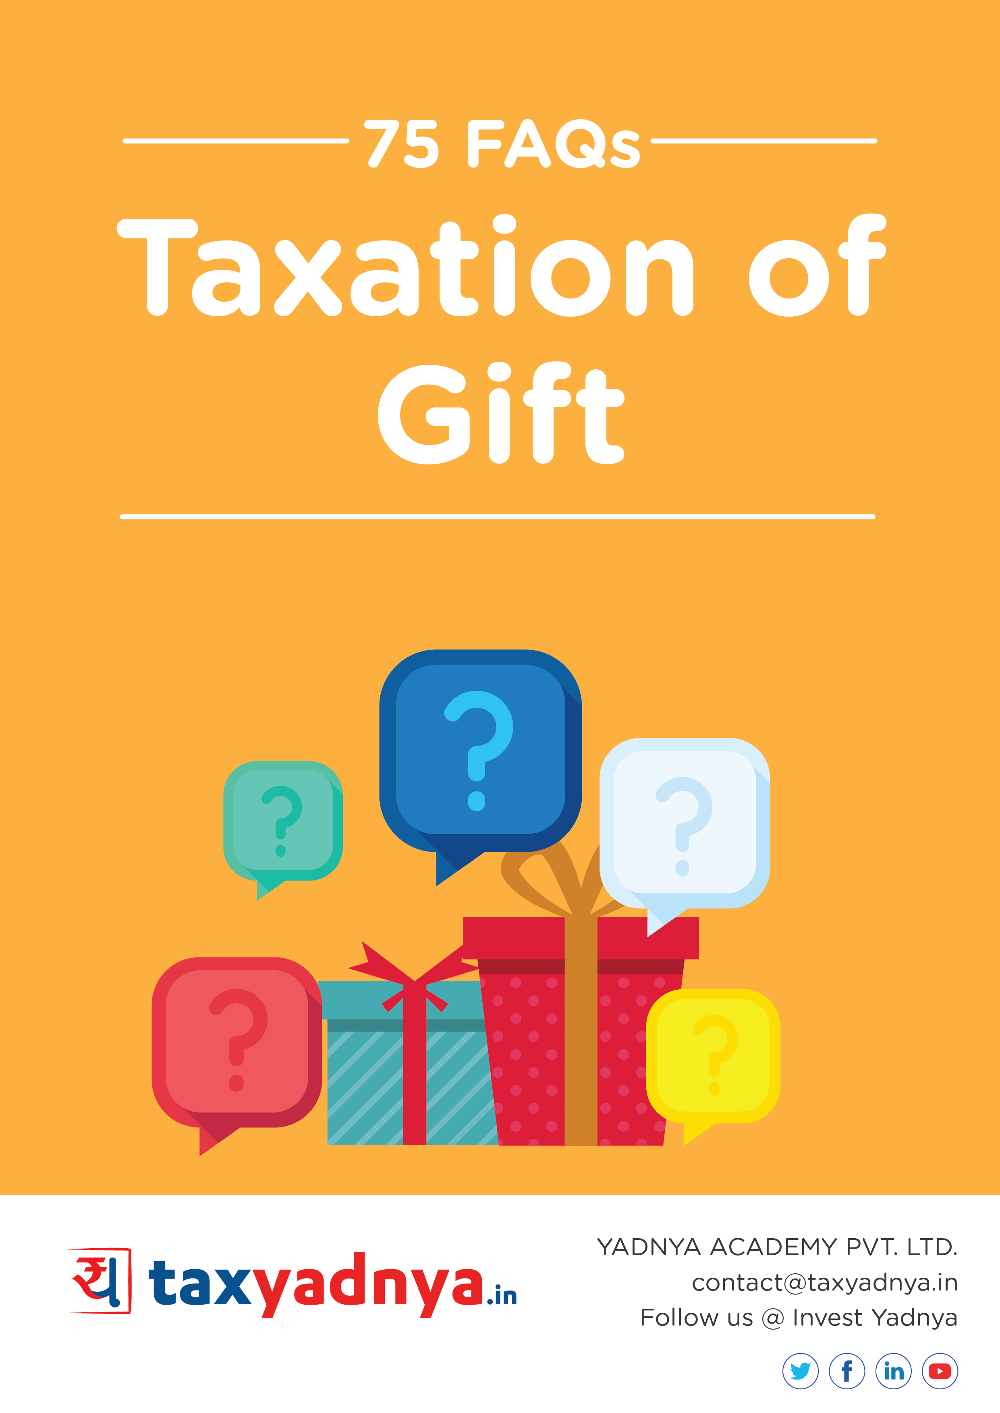 gifts from non-relatives | Gifts, Income tax, Quick news